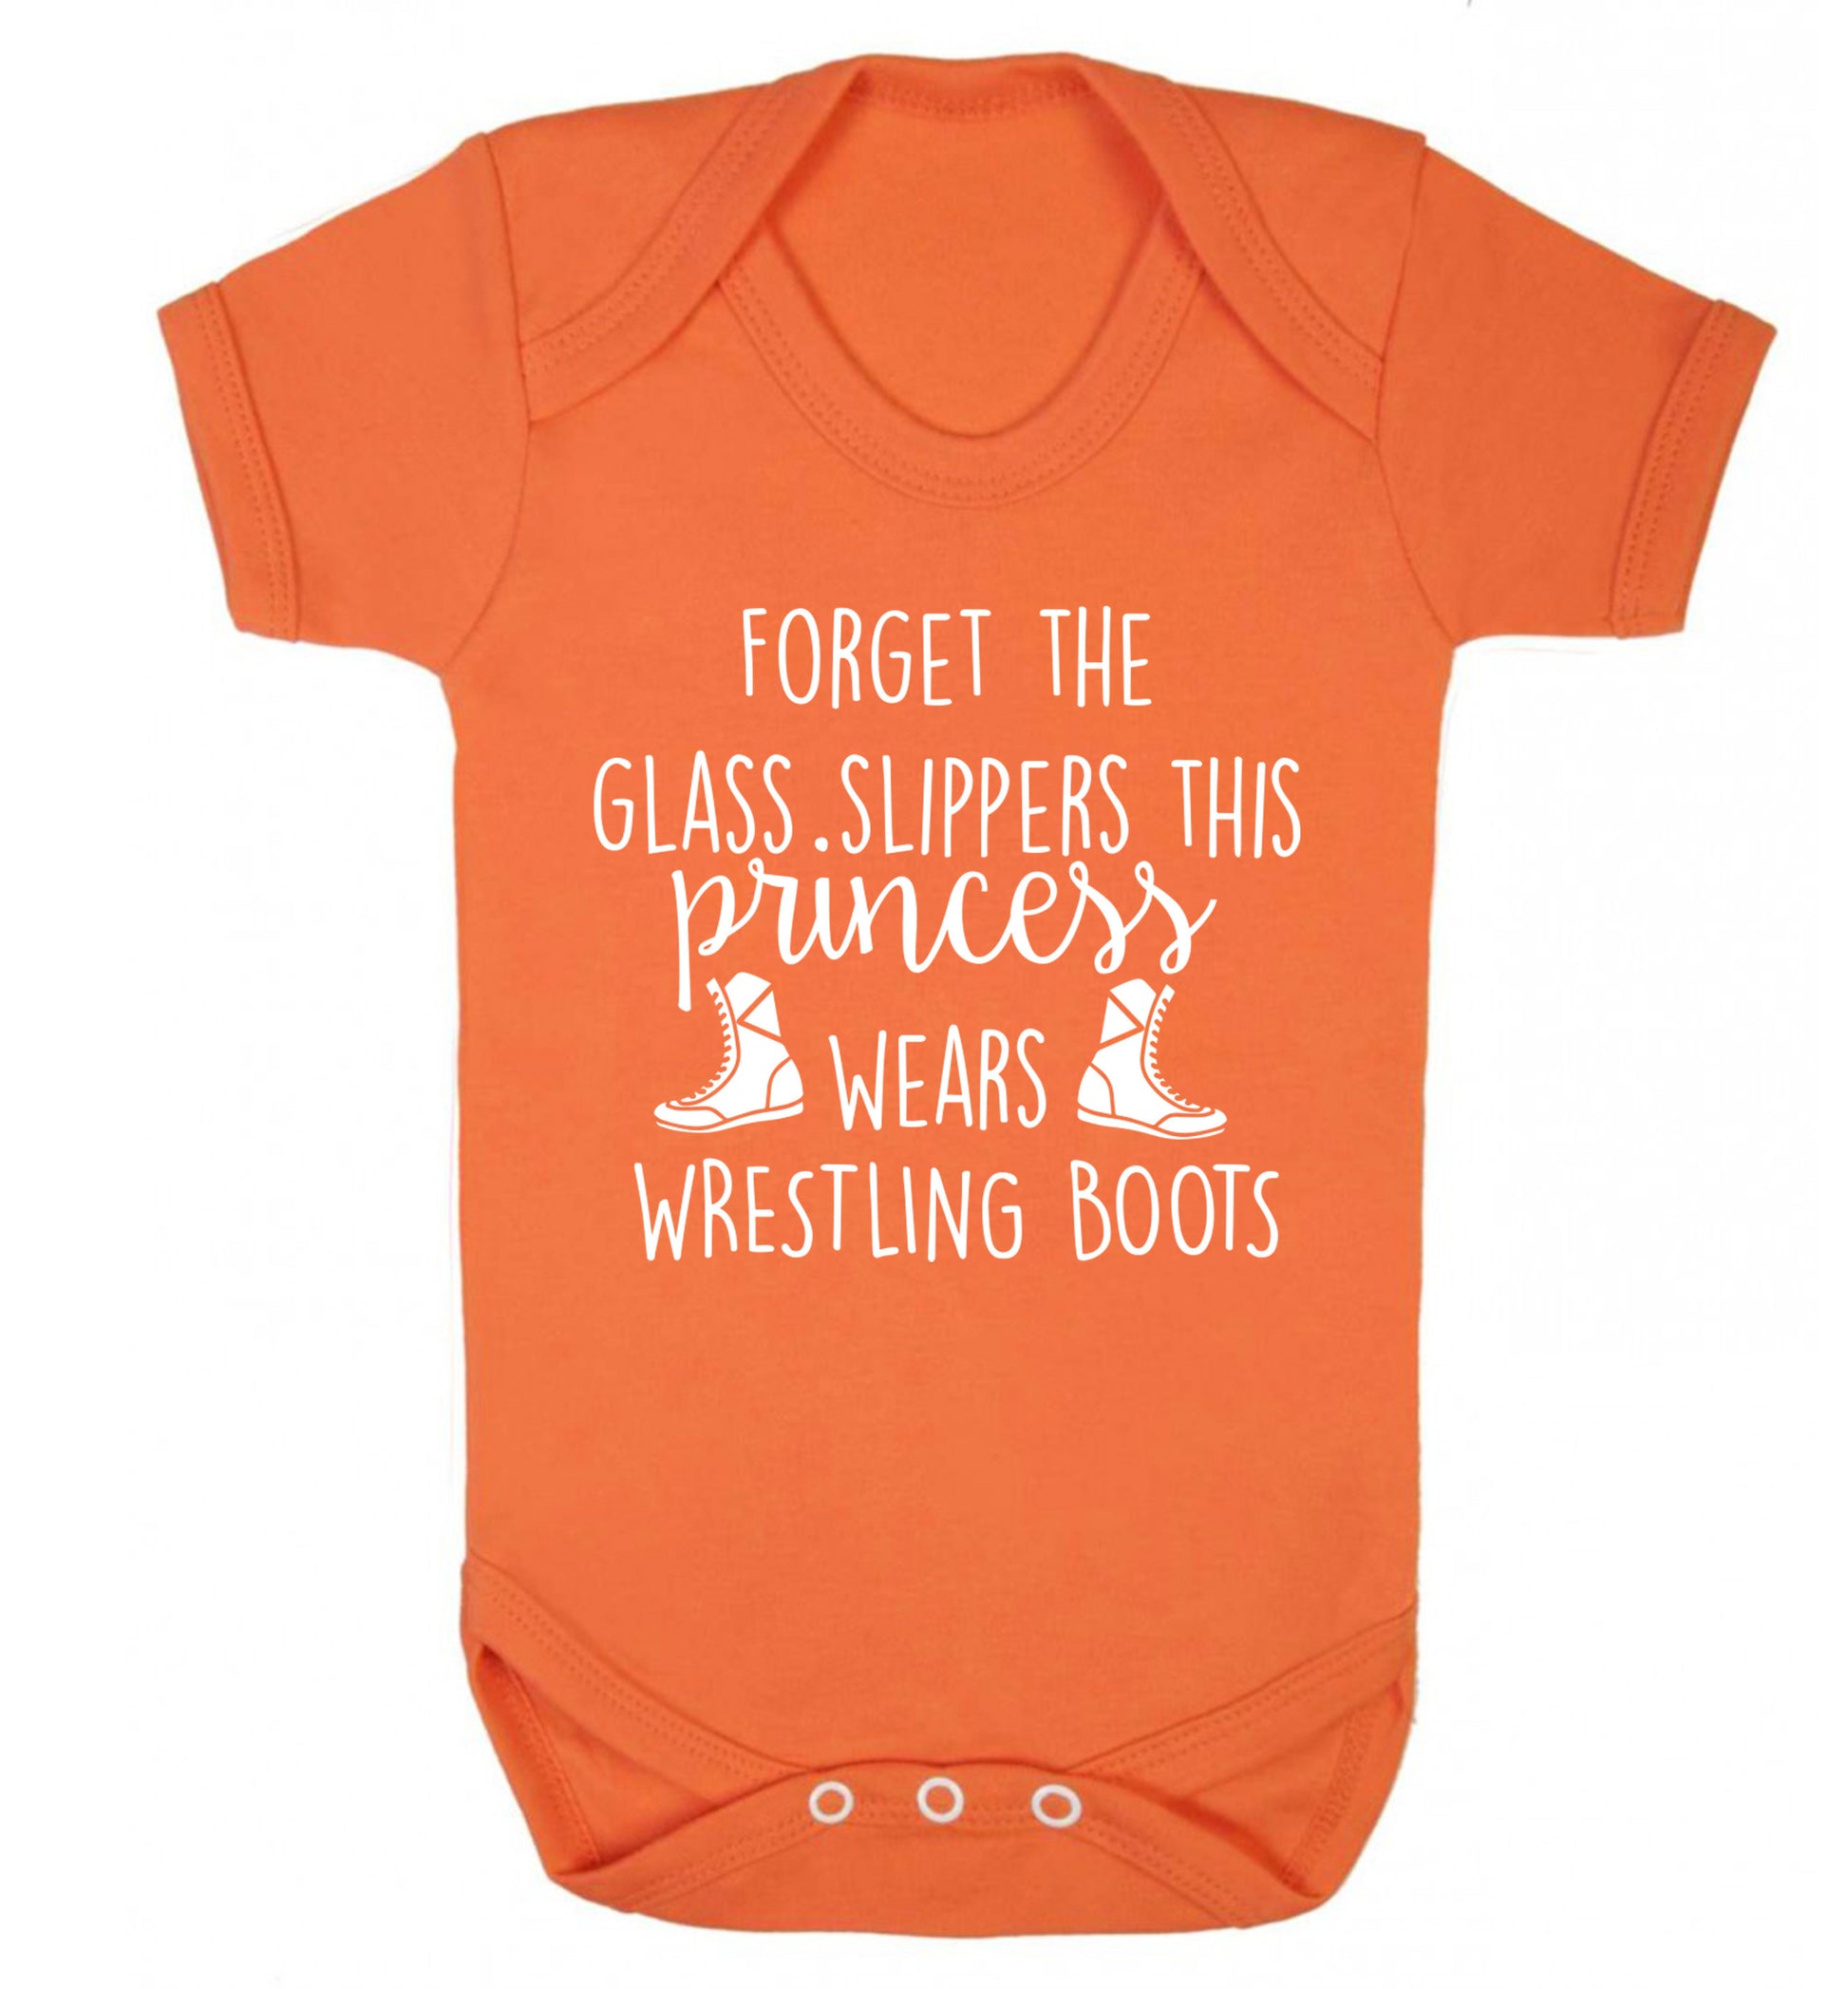 Forget the glass slippers this princess wears wrestling boots Baby Vest orange 18-24 months